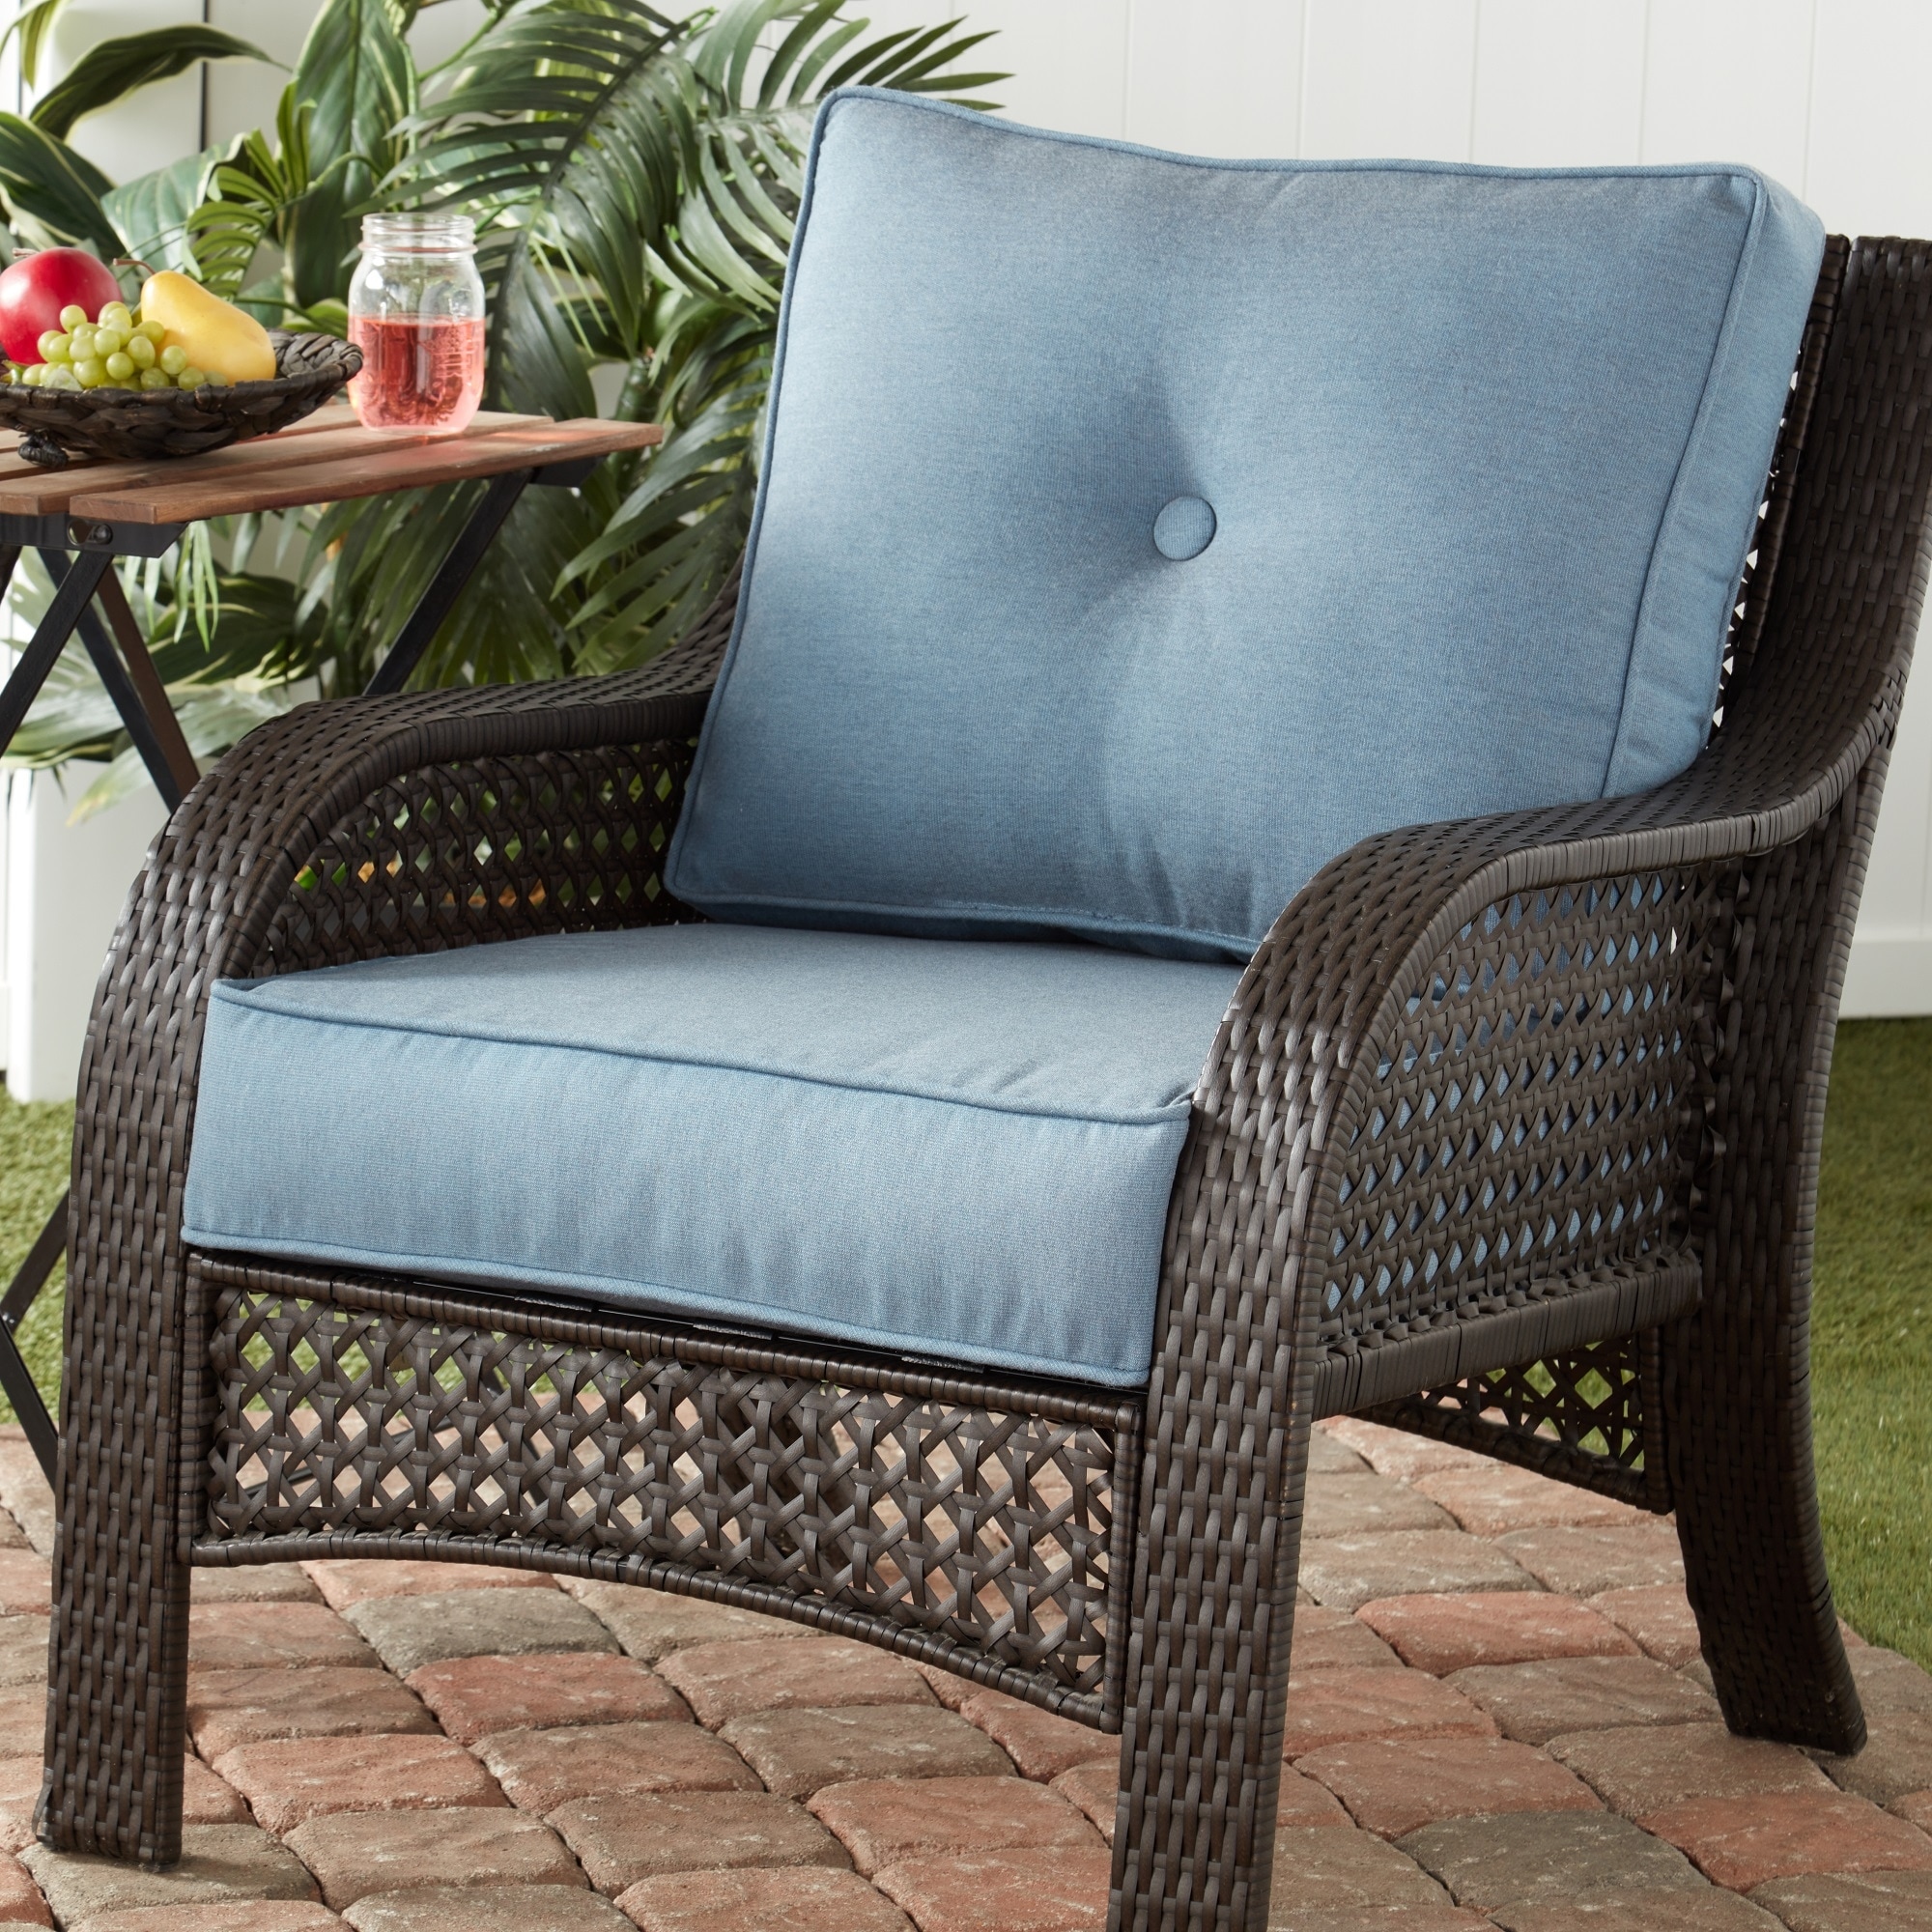 https://ak1.ostkcdn.com/images/products/is/images/direct/46af1478323711aad4311a75b2b98147aac198be/Deltaville-Sunbrella-Deep-Seat-Outdoor-Cushion-Set-by-Havenside-Home.jpg